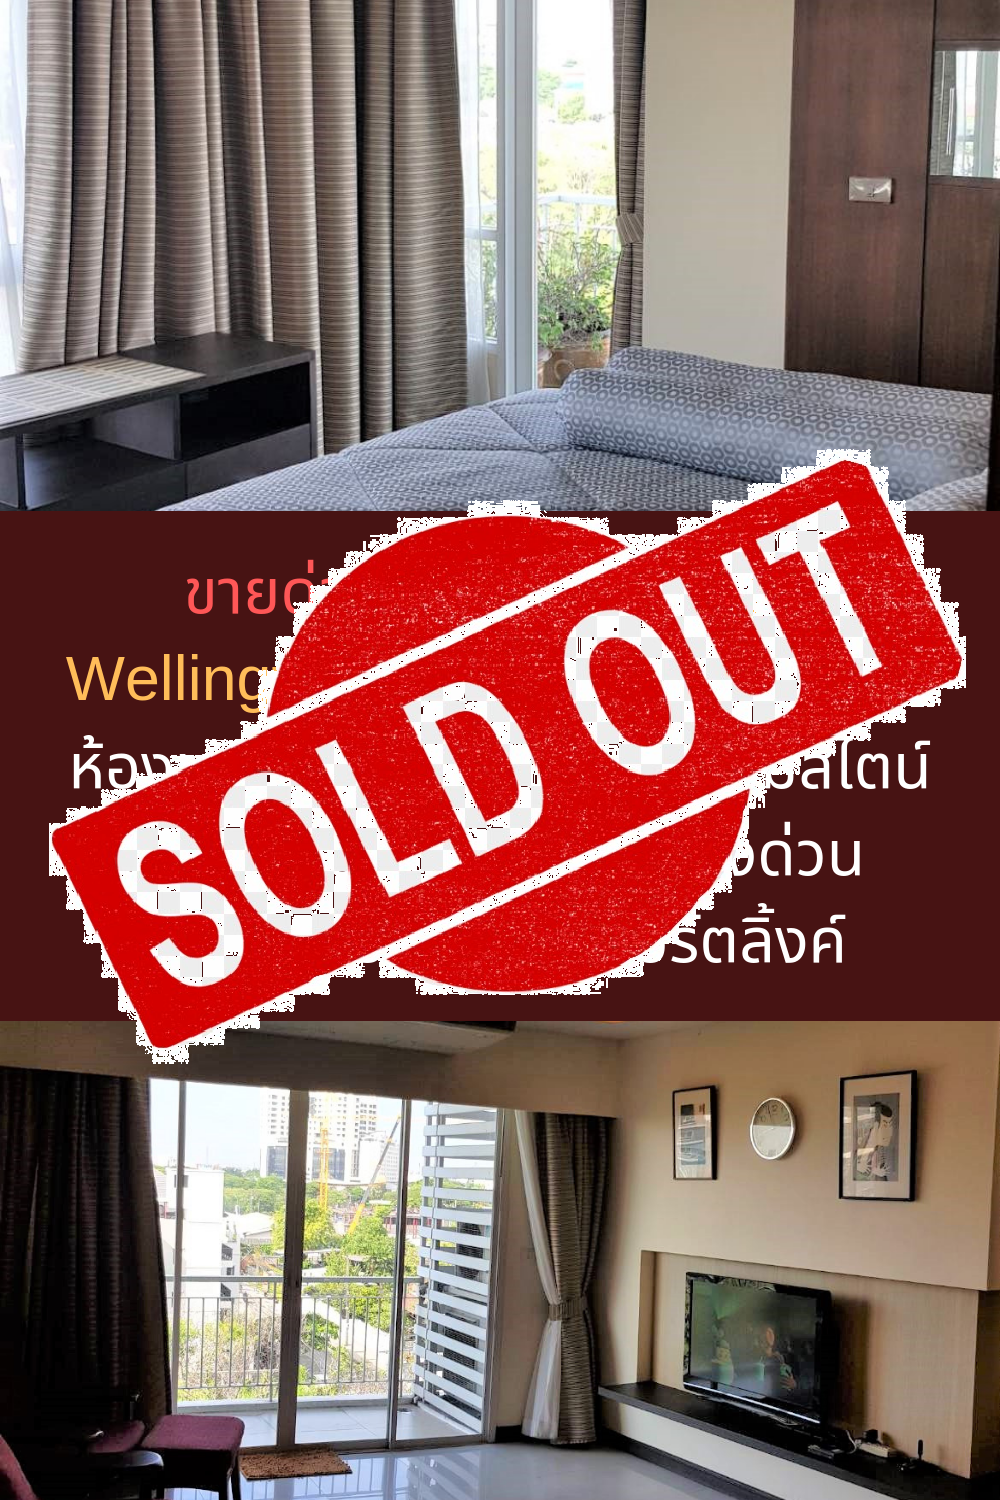 Sold Out Condo For Sale! The Wellington Ramkhamhaeng 40, 2 bedrooms, 97 sqm., Decorated in Japanese style, near the Airport Link, BTS Orange Line!